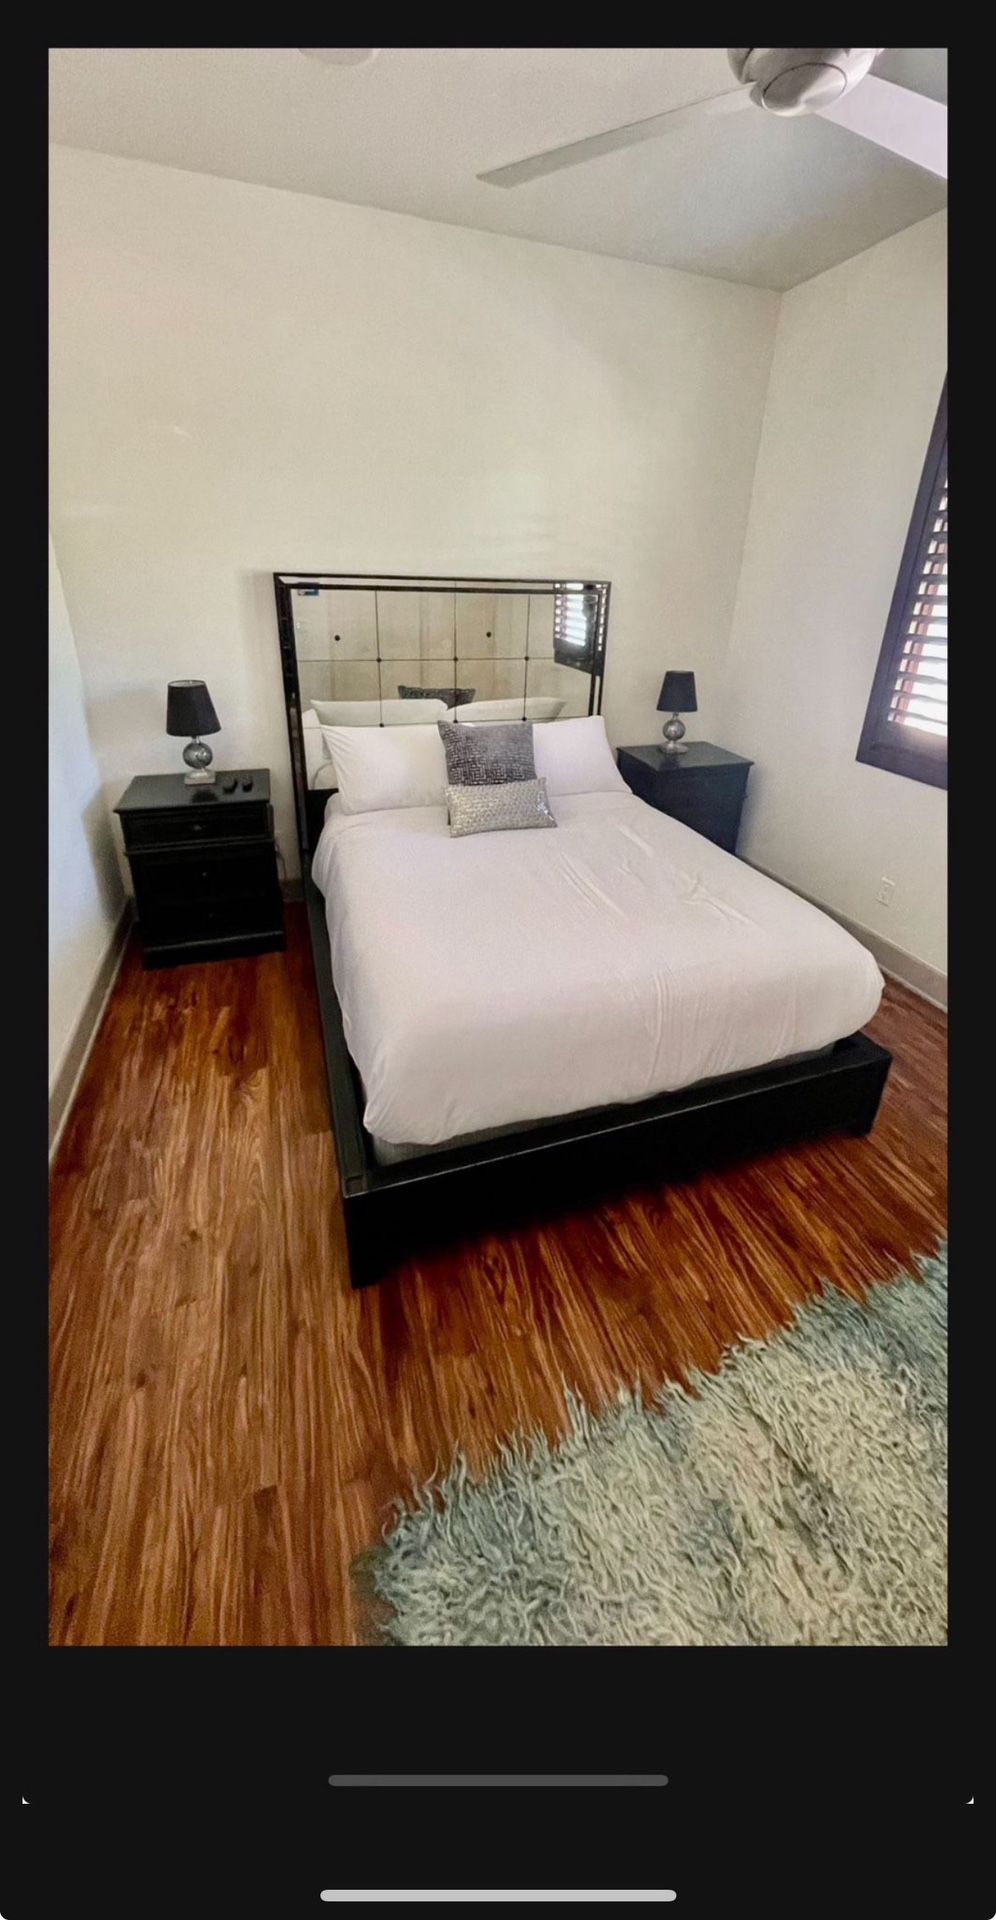 Restoration Hardware Queen Strand Mirror Bed And 2 Black Montpellier Nightstands End Tables $8,000 New